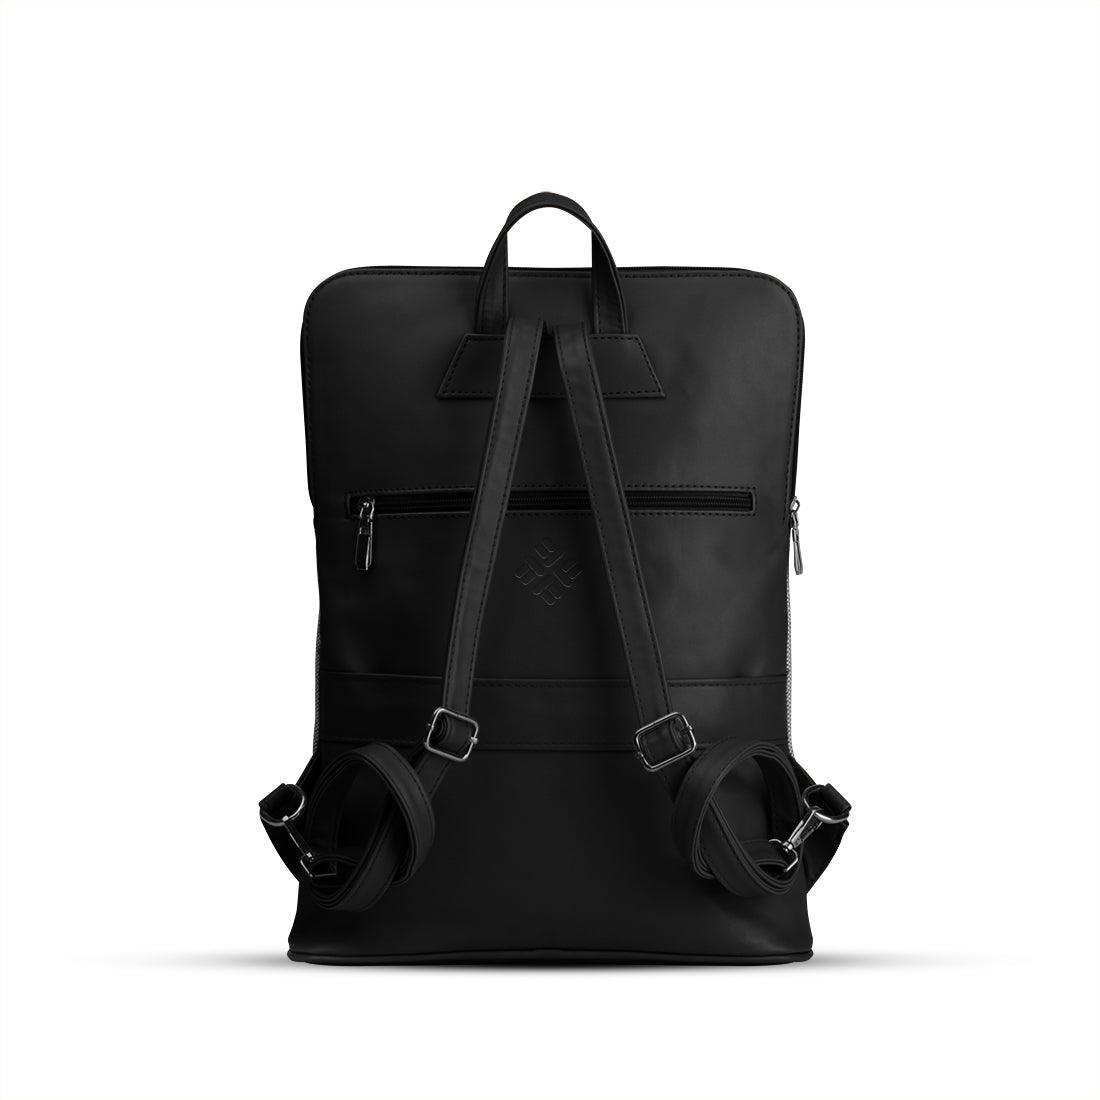 Black Orbit Laptop Backpack In The Space - CANVAEGYPT